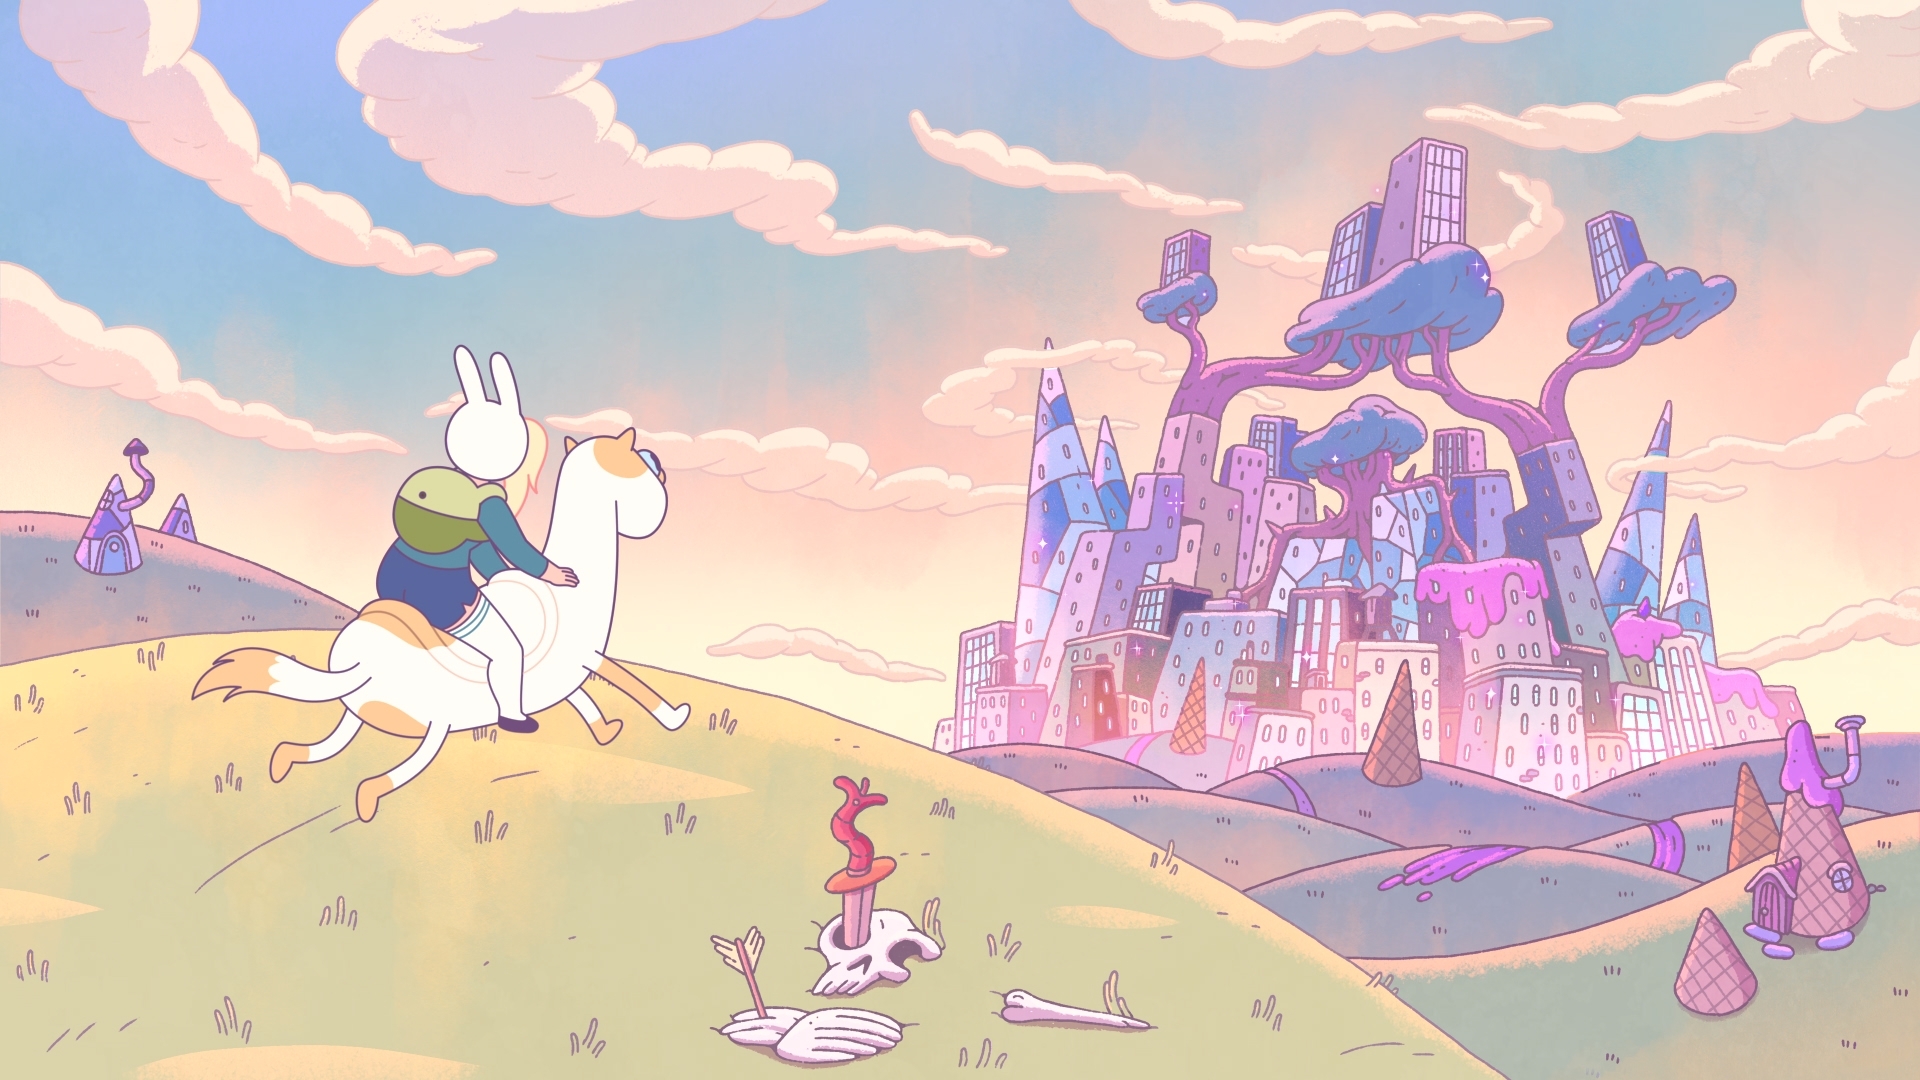 Fionna and Cake (stretched into a horse-like shape) gallop across the plains toward a pink city in Fionna and Cake.